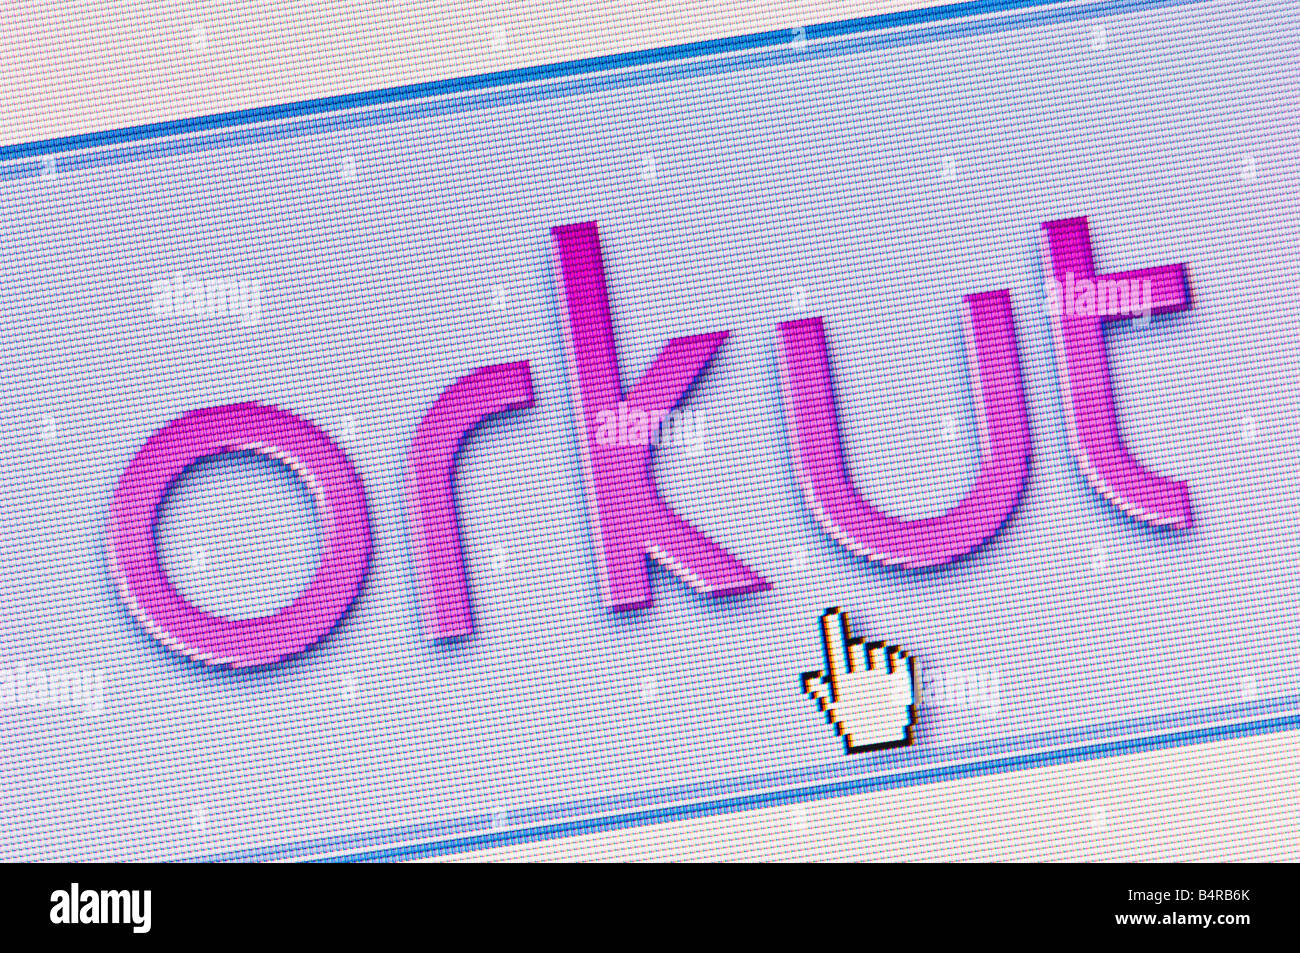 Macro screenshot of Orkut logo the social networking and discussion site operated by Google Editorial use only Stock Photo